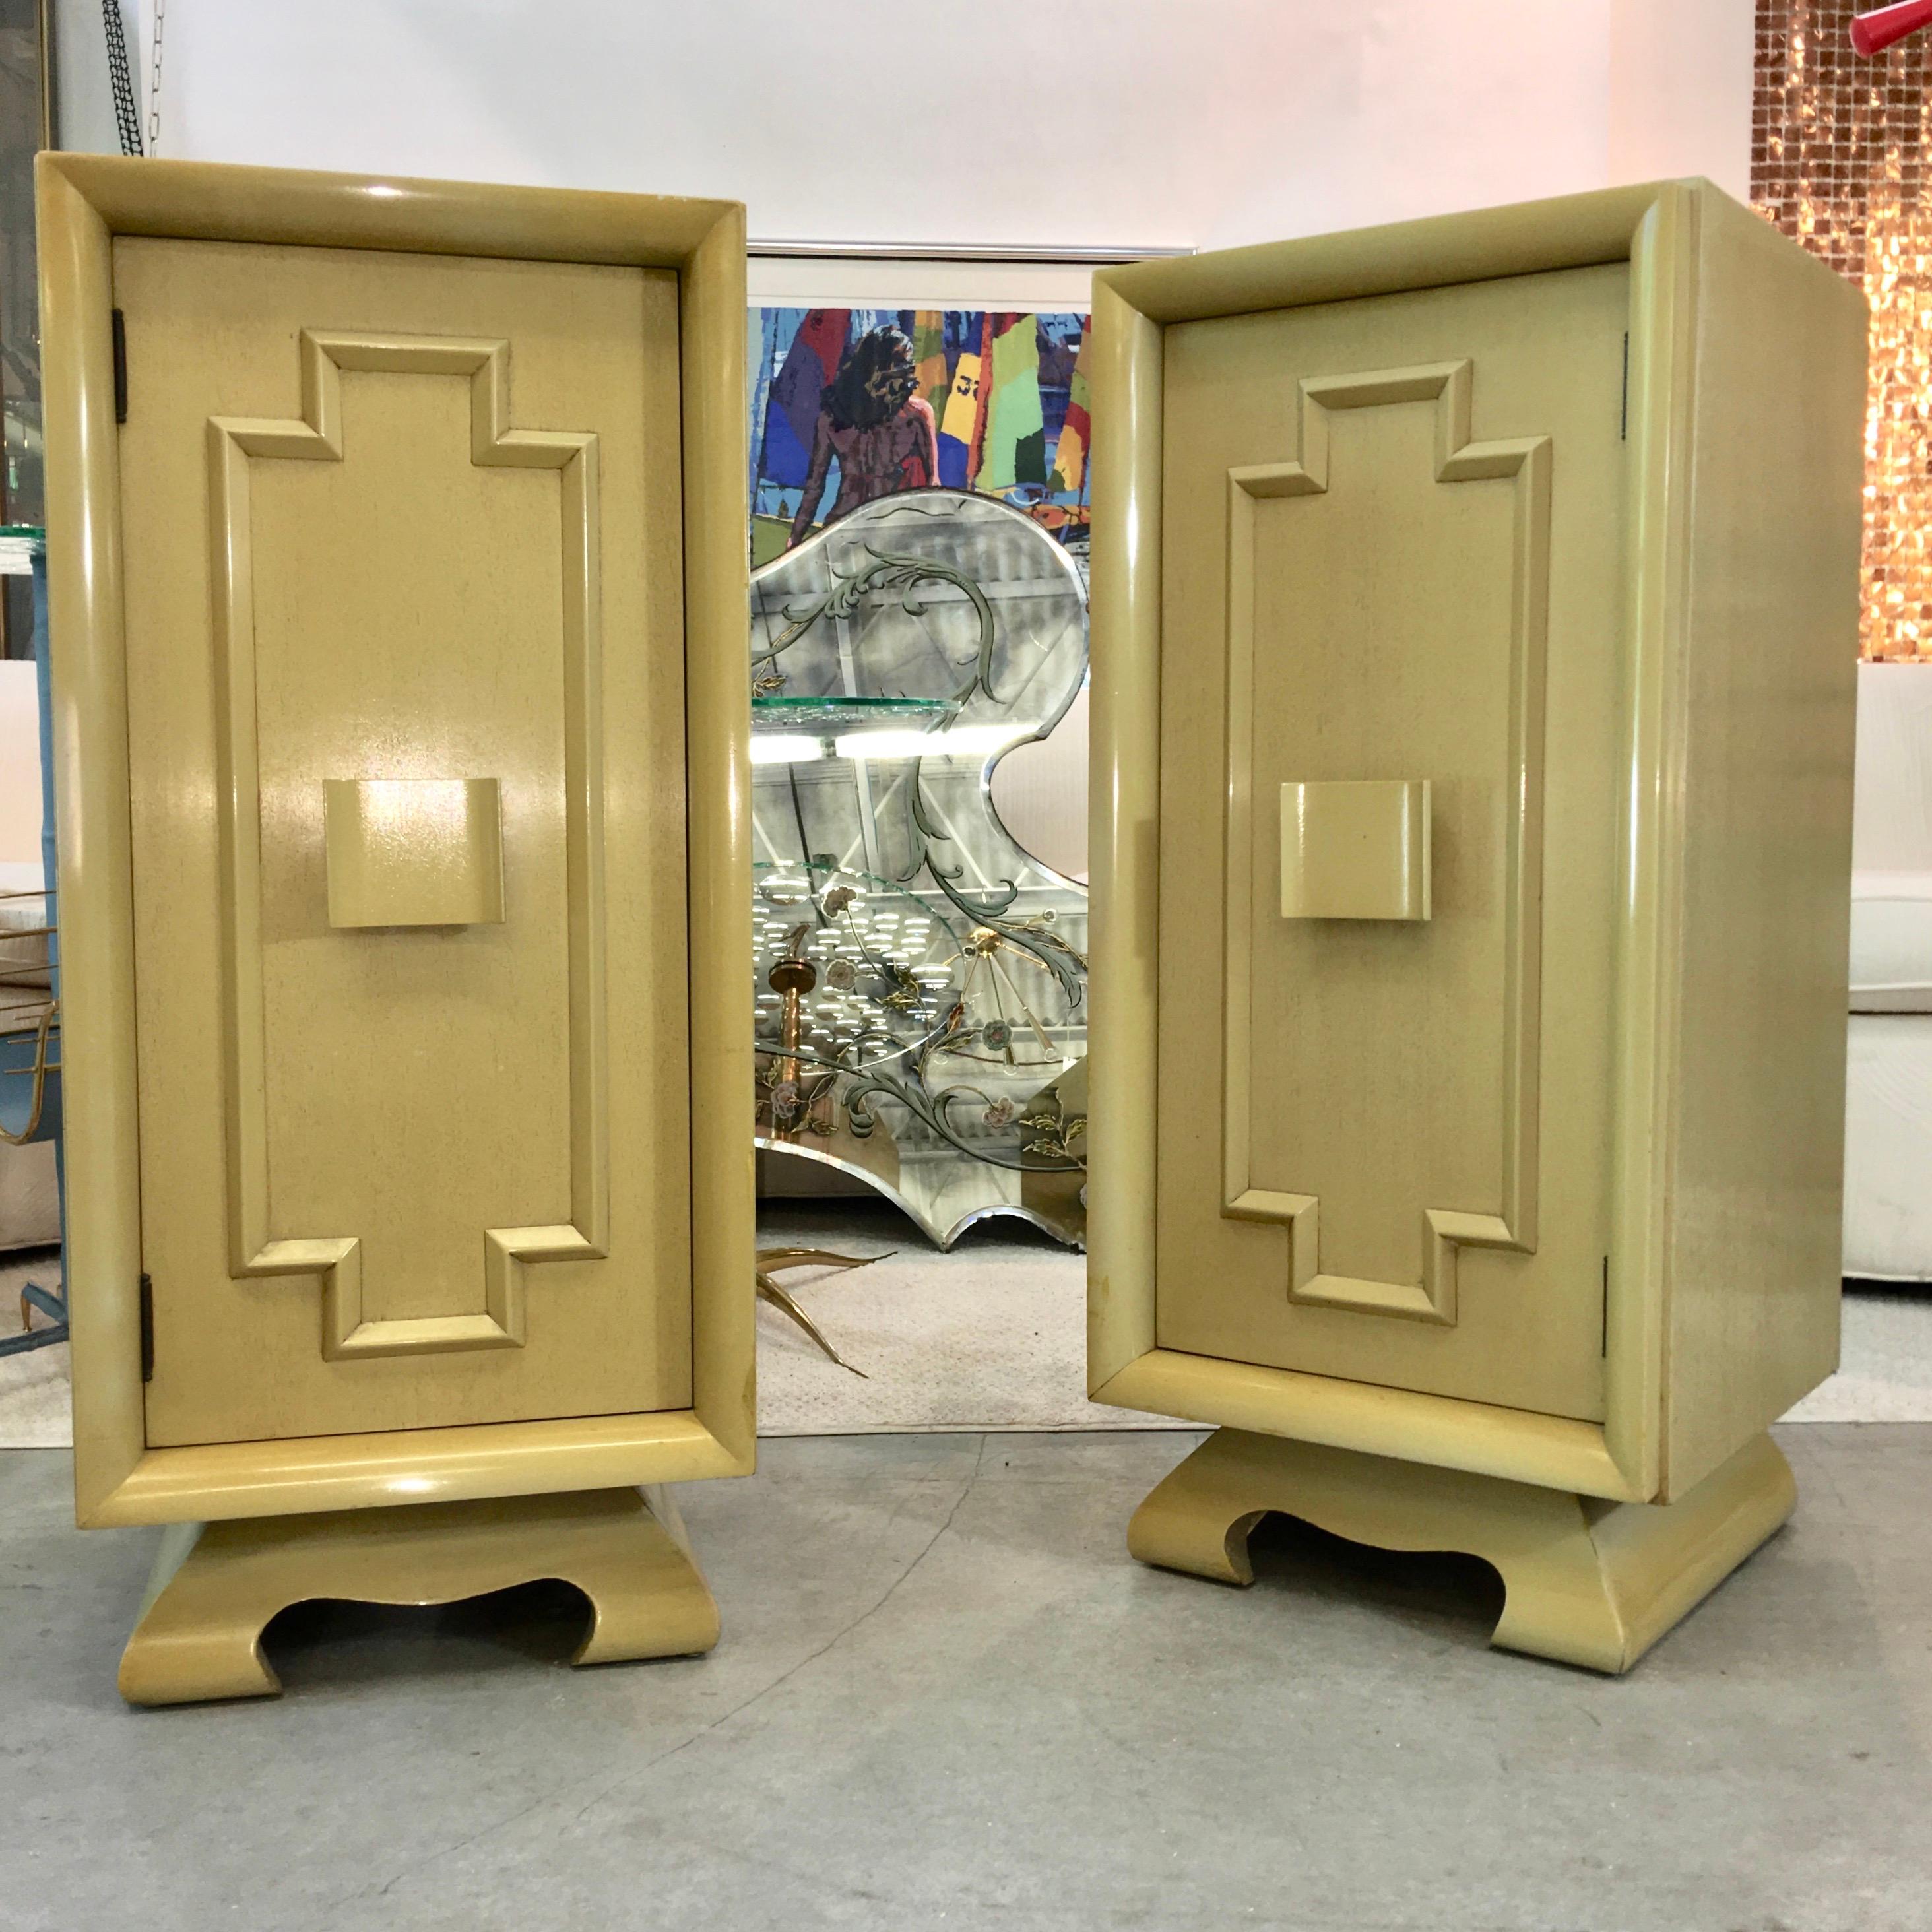 Pair of tall and slim vintage bedside cabinets in Asian modernist form popularized by James Mont and the Kittinger Mandarin collection. Note the pagoda form feet and geometric moulding on the doors as well as the stylish central medallion pull.